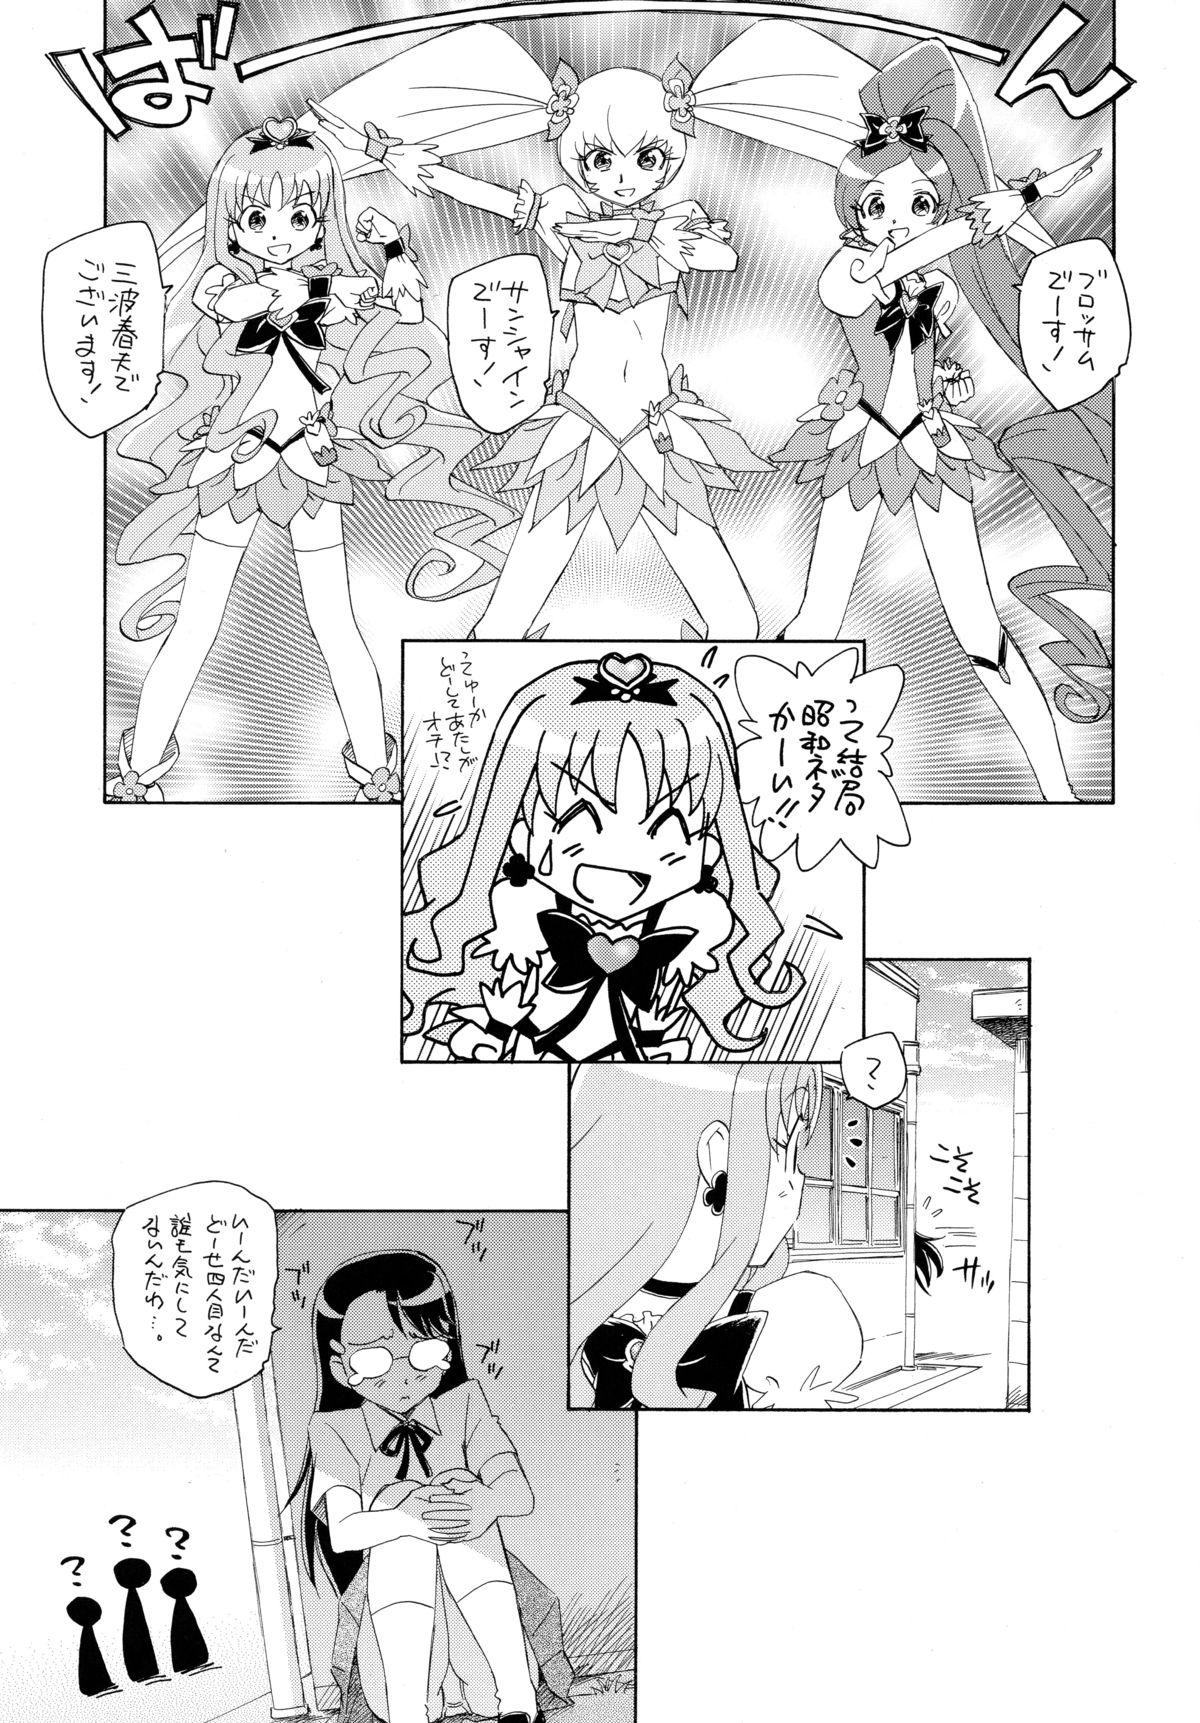 Perverted 1 + 2 + Sunshine - Heartcatch precure Booty - Page 24